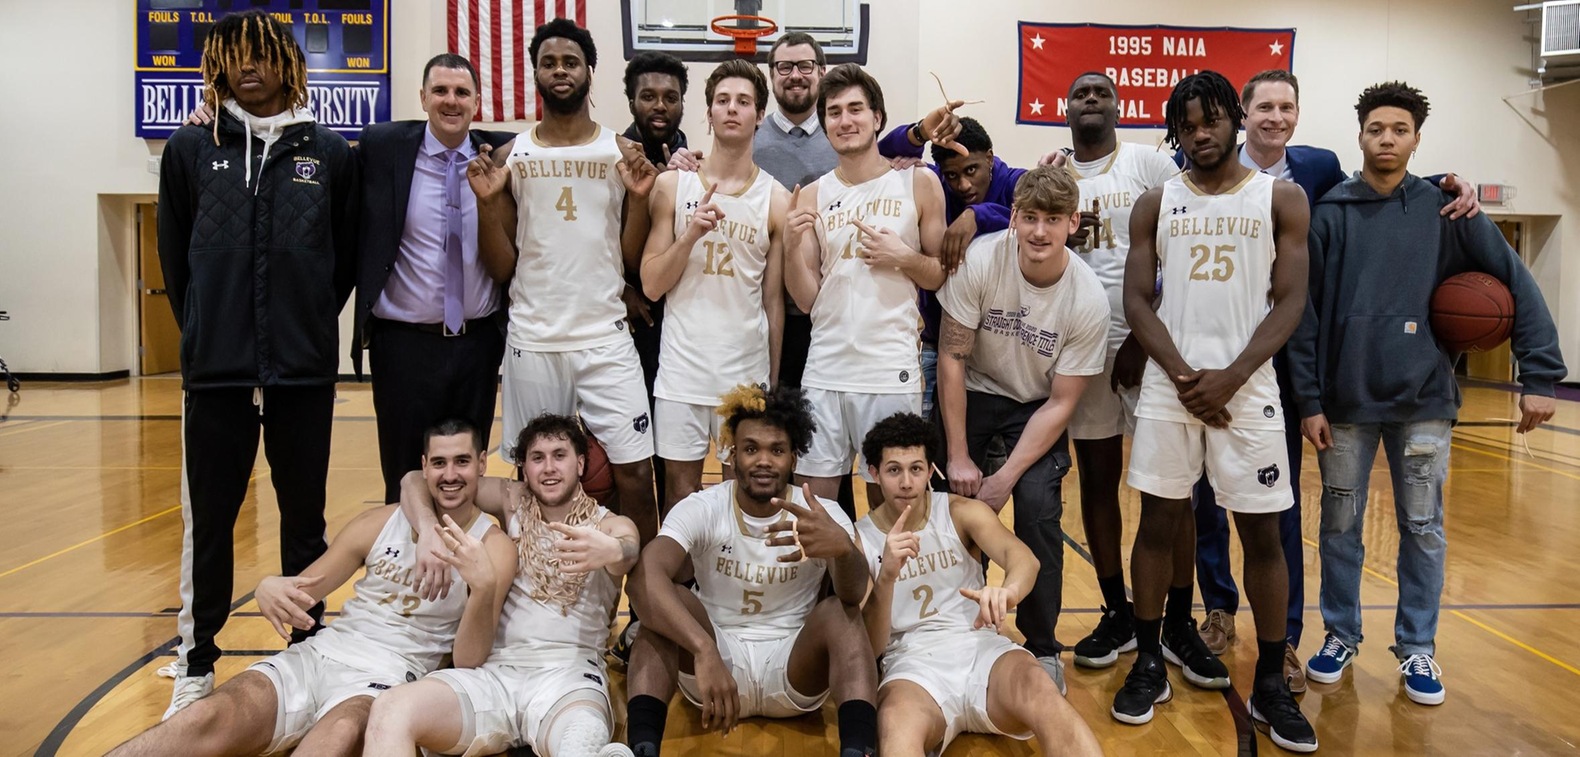 Bruins share conference crown after 68-67 win over Trojans